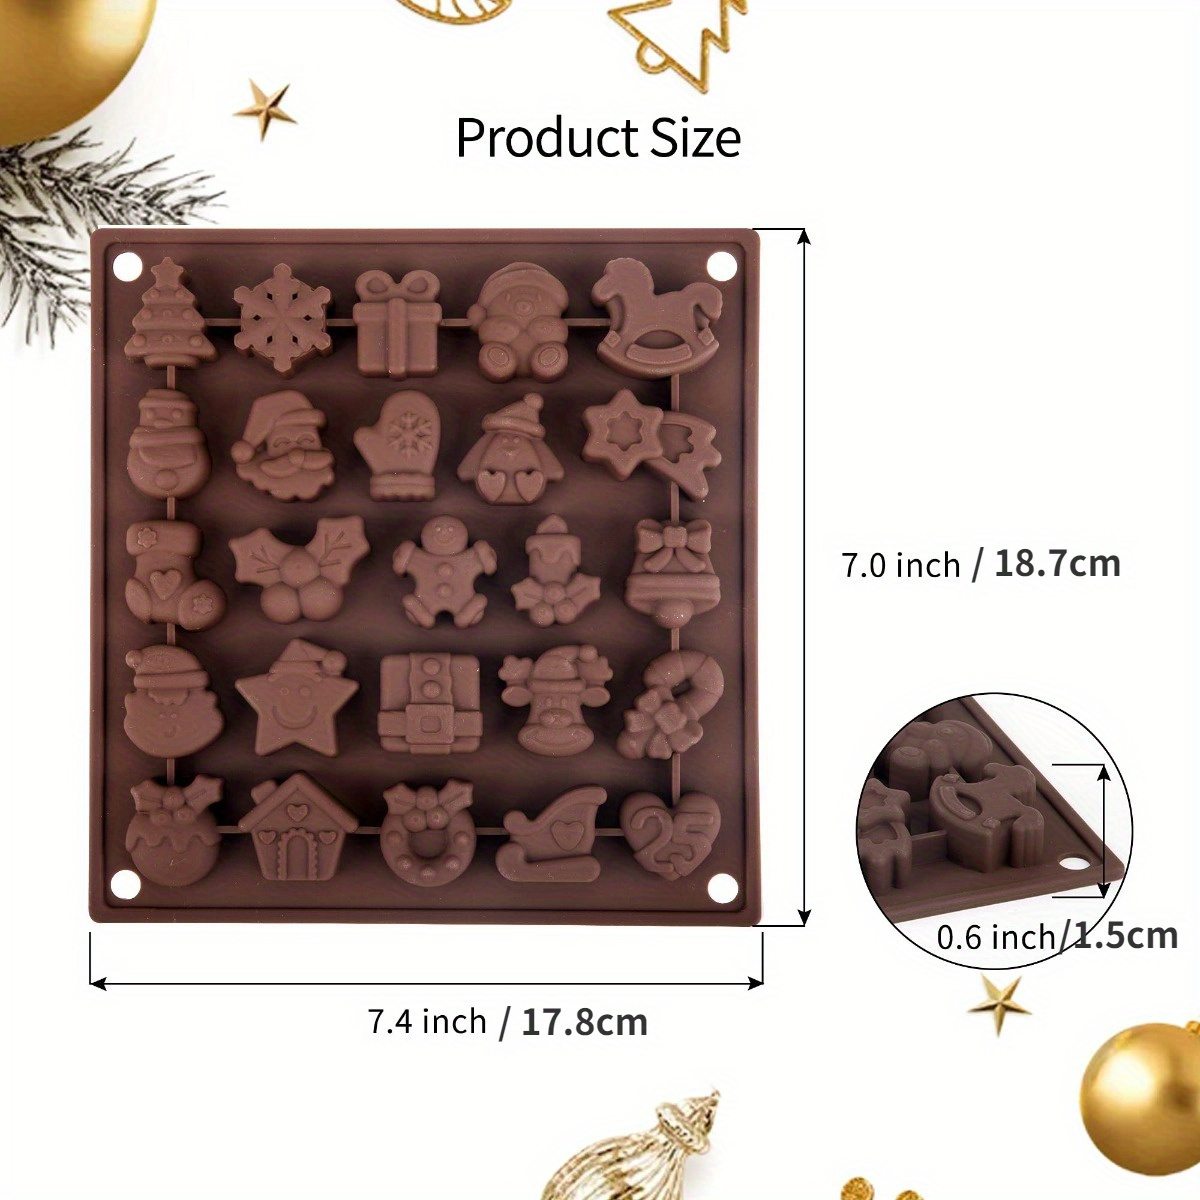 6 Piece Set of Christmas Silicone Molds Candy Baking & More -Celebrate  It- SANTA